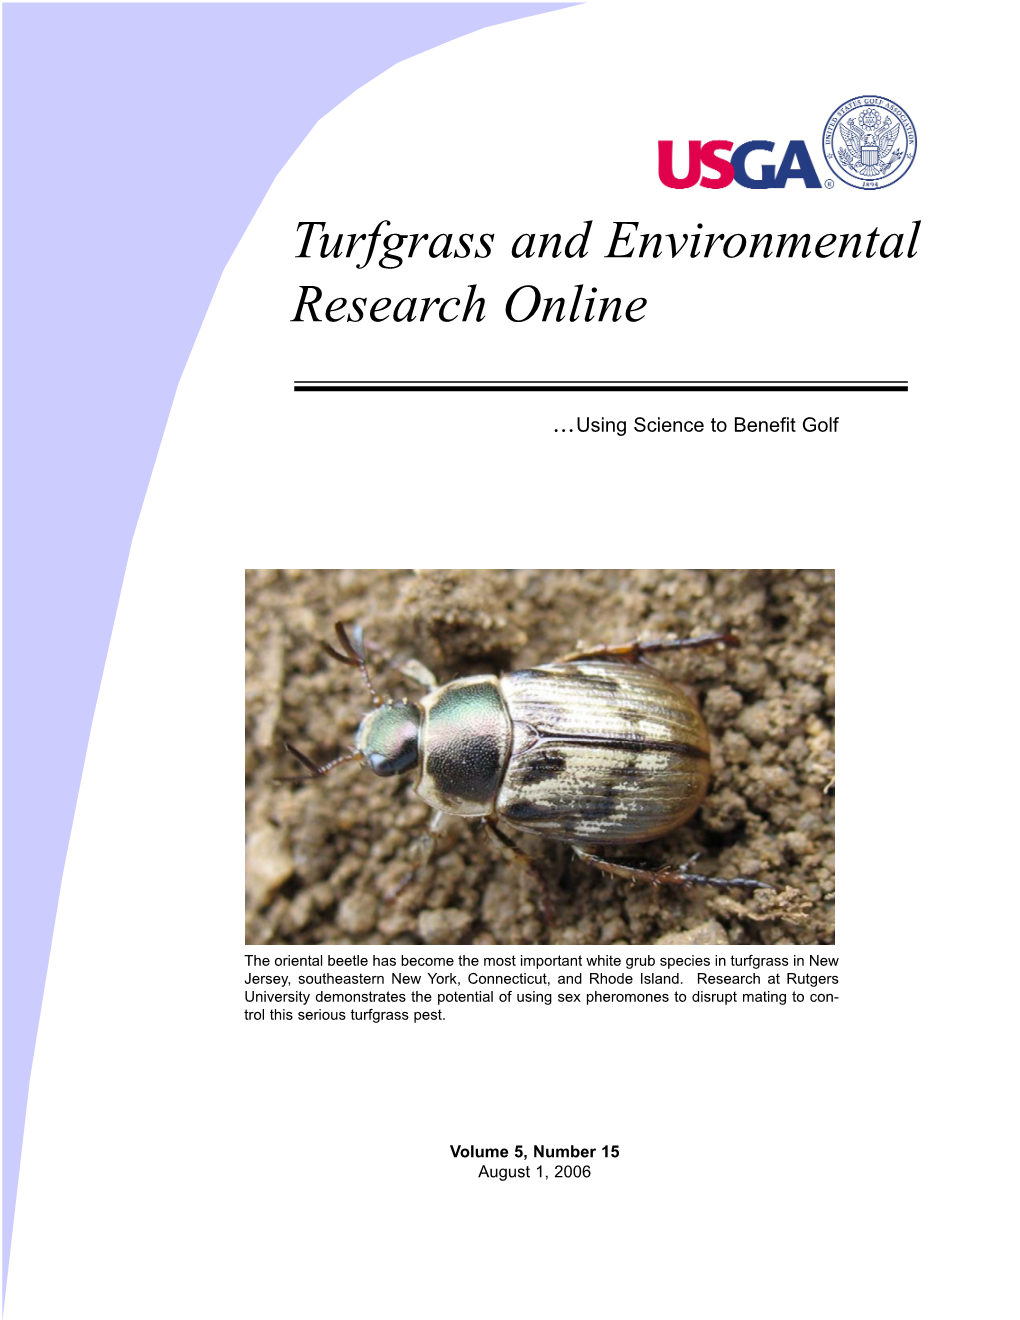 Mating Disruption of Oriental Beetle with Sprayable Sex Pheromone Formulations